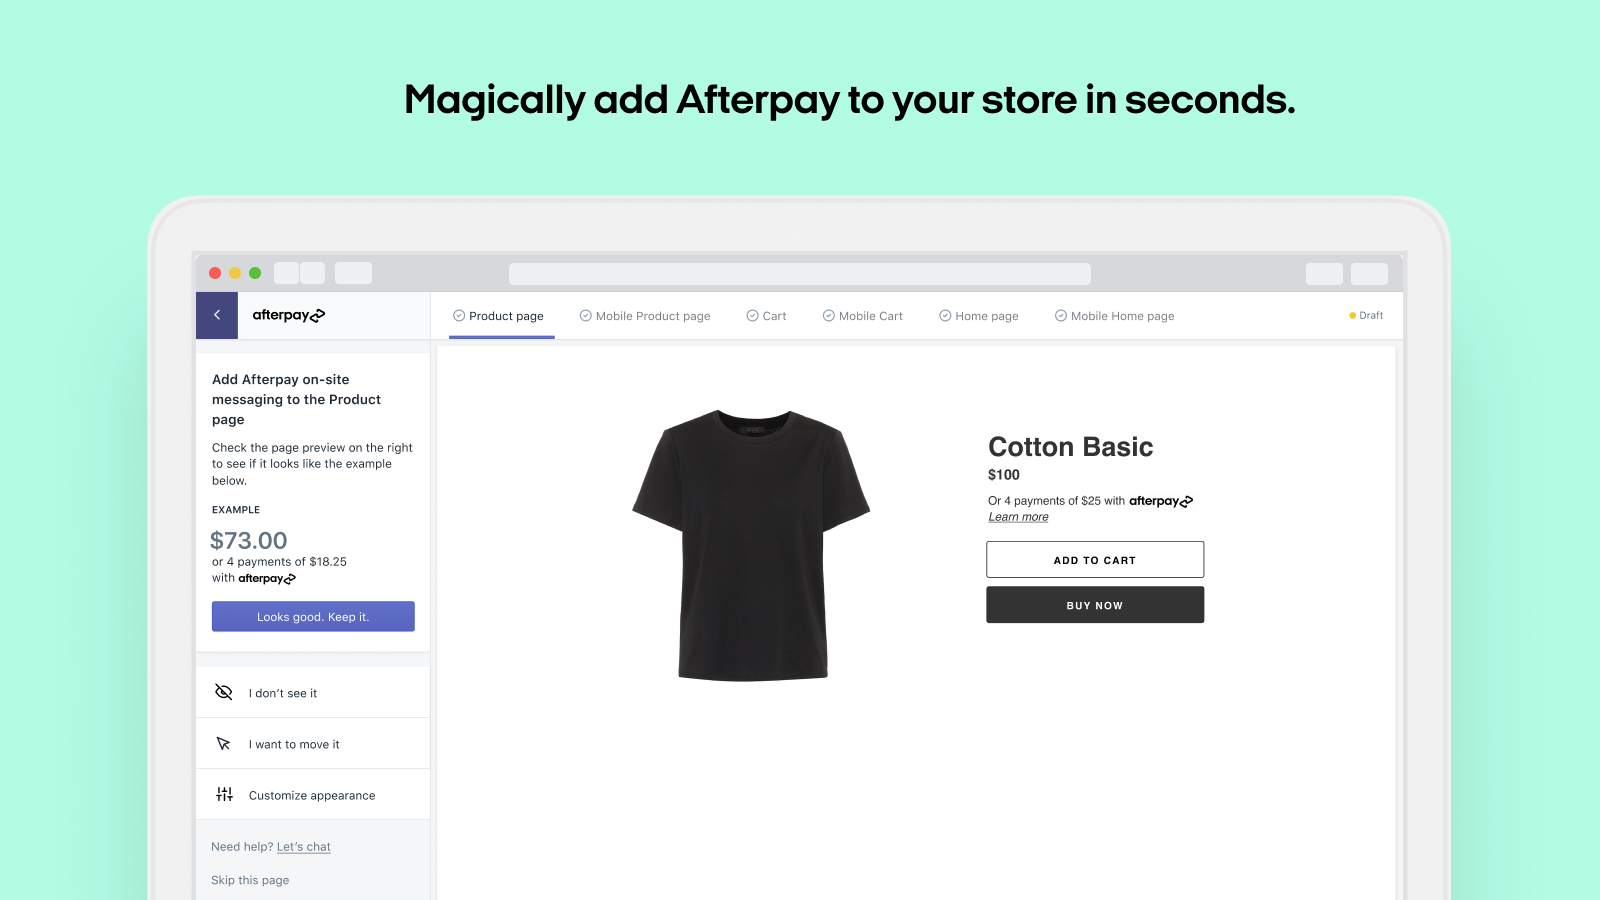 Magically add Afterpay to your store in seconds.